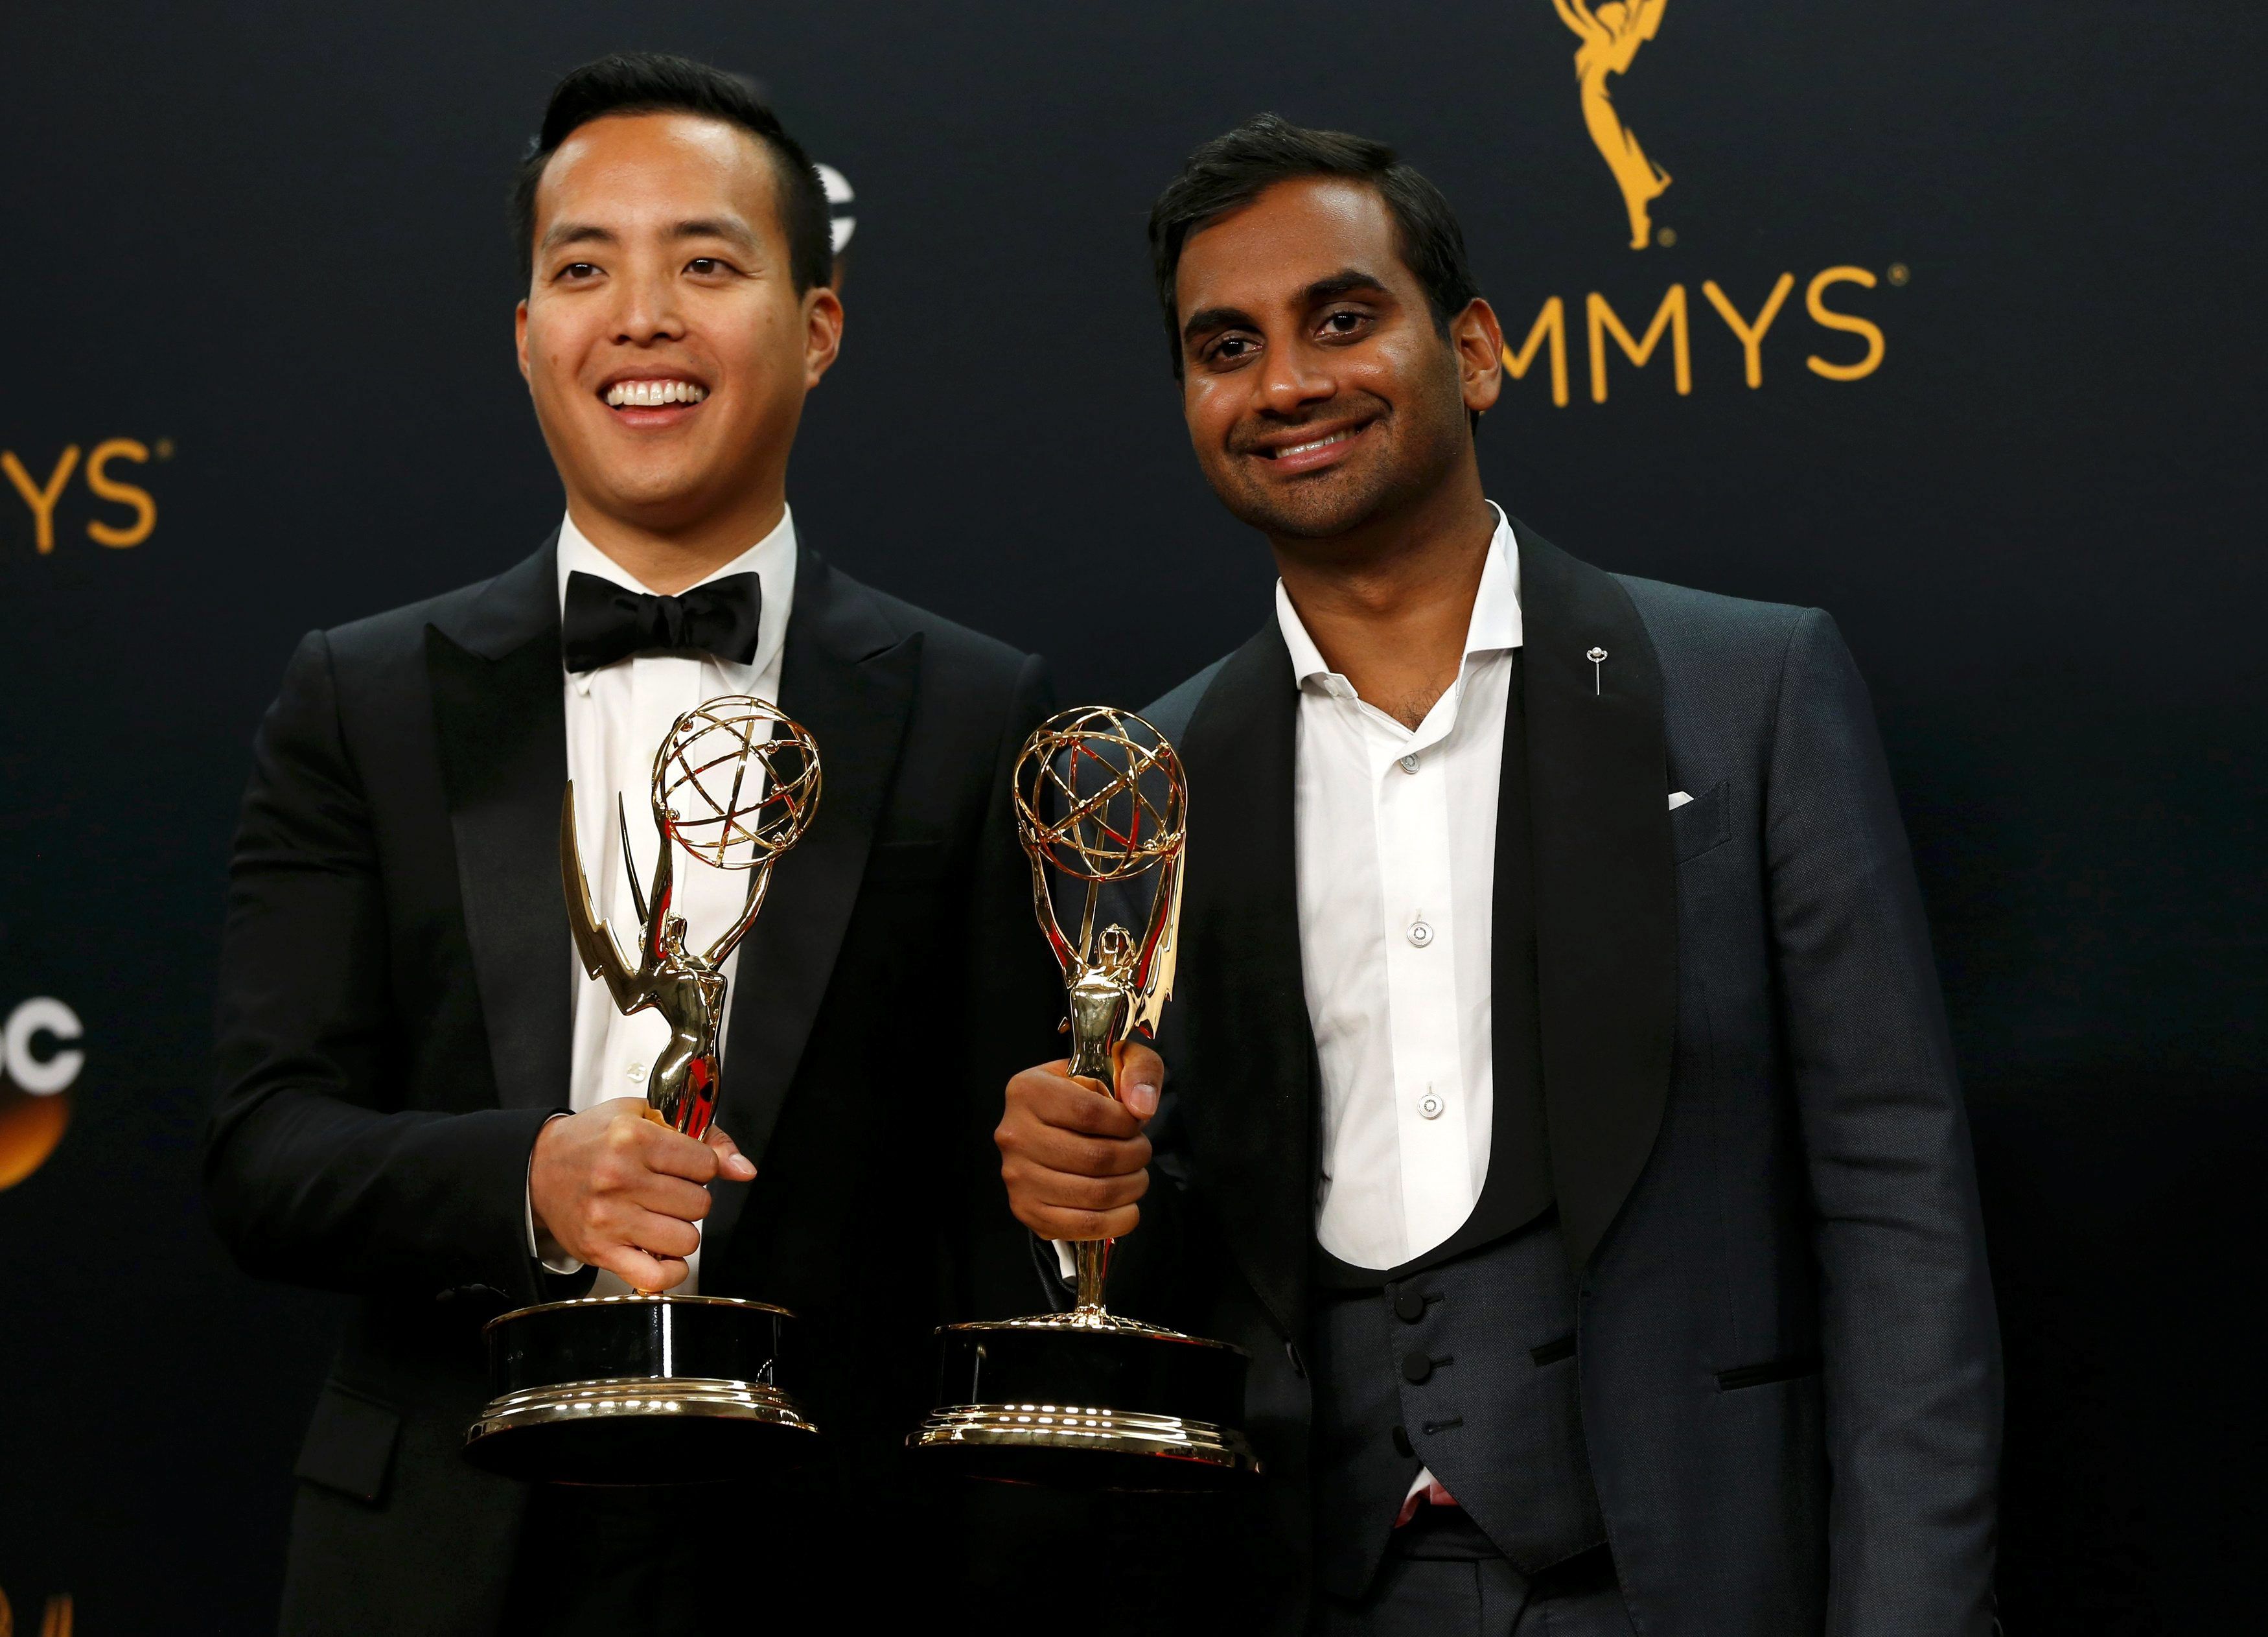 Highlights from the 68th Primetime Emmy Awards: Game of Thrones, Veep,  Maggie Smith, Aziz Ansari win - Photos News , Firstpost